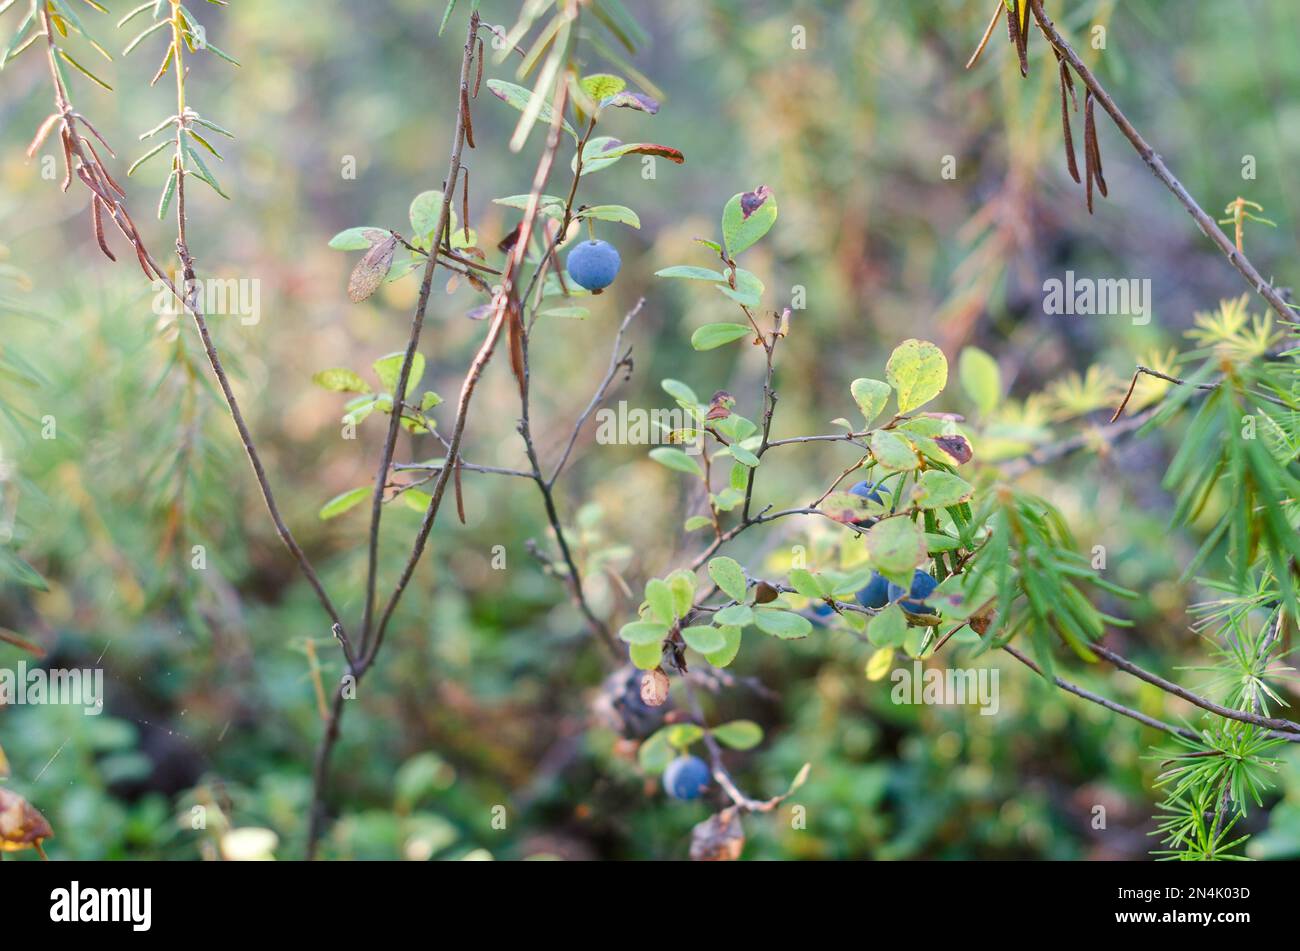 Blue juicy wild blueberries grow on a Bush in multi-colored vegetation over the grass in green and red autumn in the tundra of the forest of Yakutia. Stock Photo